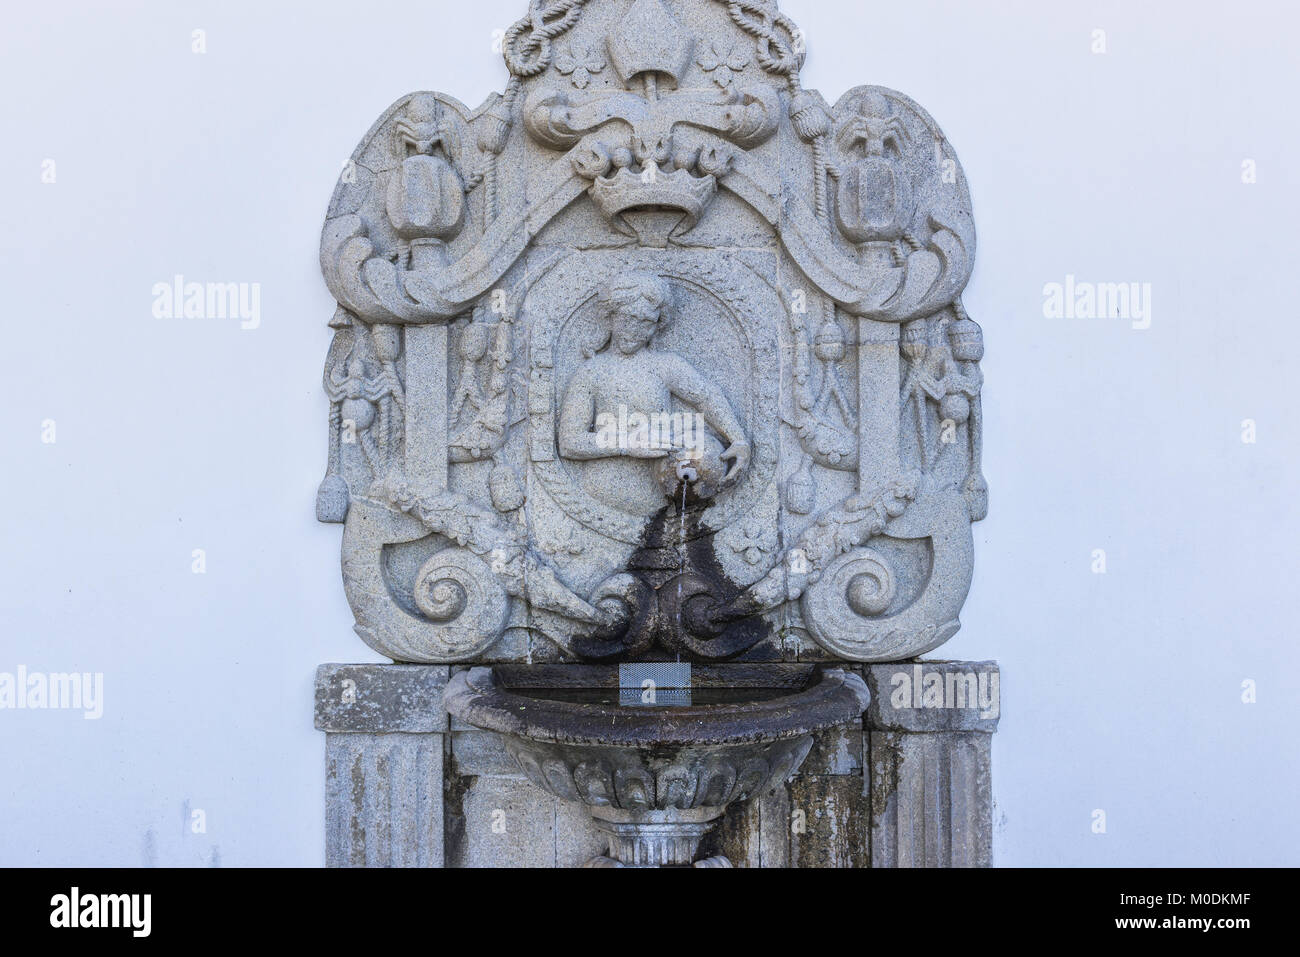 One of the Five Senses fountains of stairs of Bom Jesus do Monte (Good Jesus of the Mount) sanctuary in Tenoes, outside the city of Braga, Portugal Stock Photo